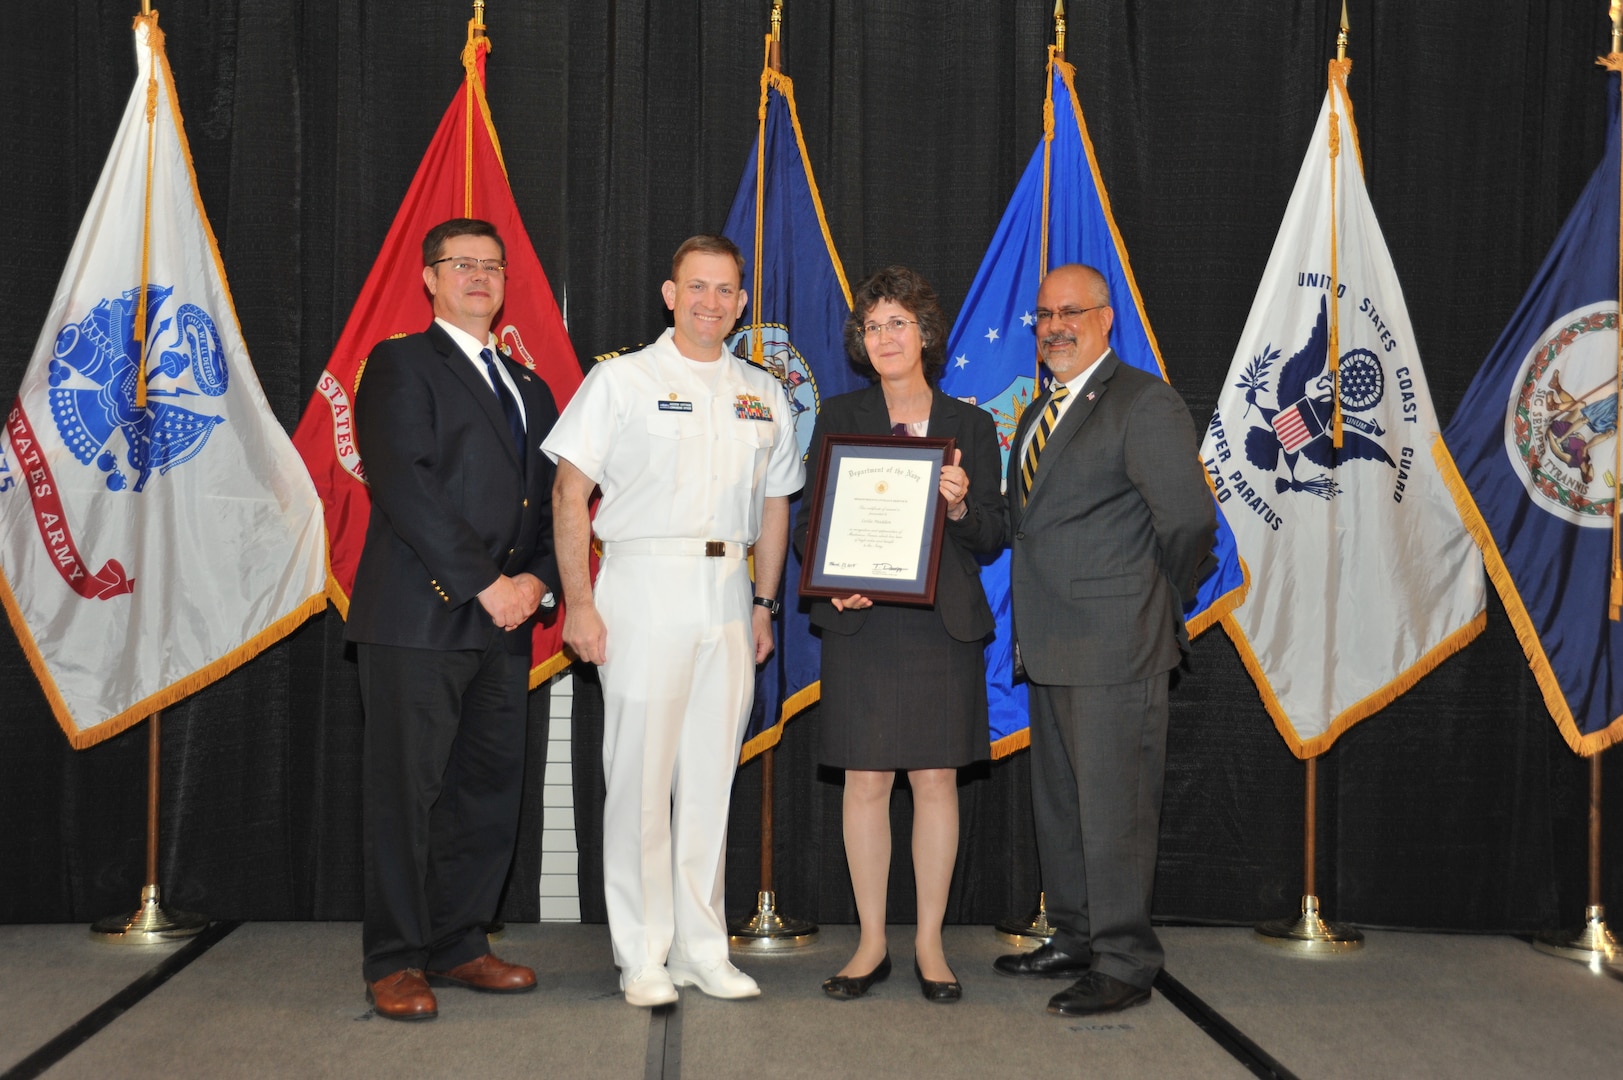 IMAGE: Leslie Madden is presented the Navy Meritorious Civilian Service Award at Naval Surface Warfare Center Dahlgren Division's annual awards ceremony, Apr. 26 at the Fredericksburg Expo and Conference Center.